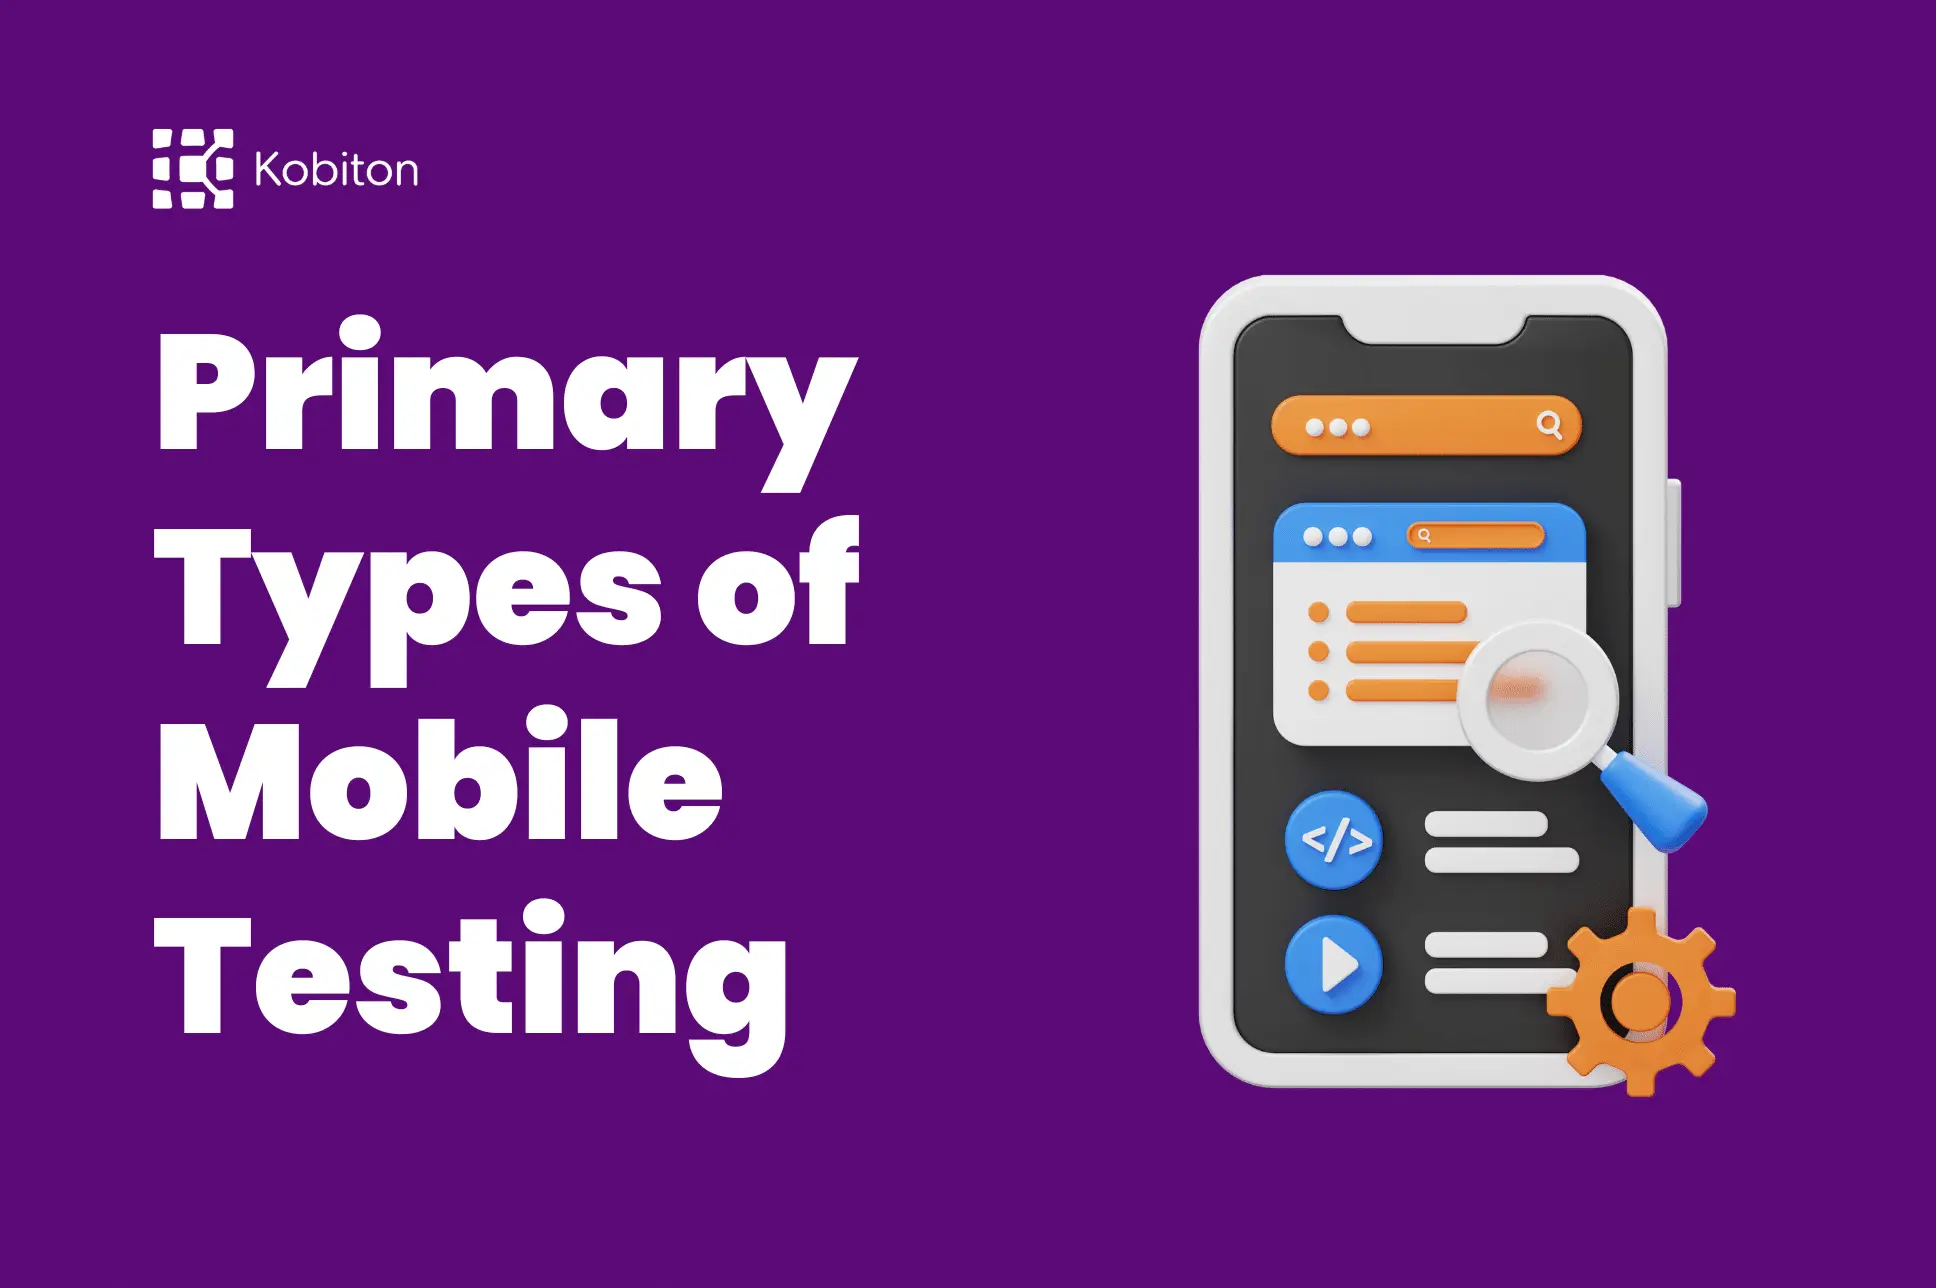 Primary Types of Mobile Testing